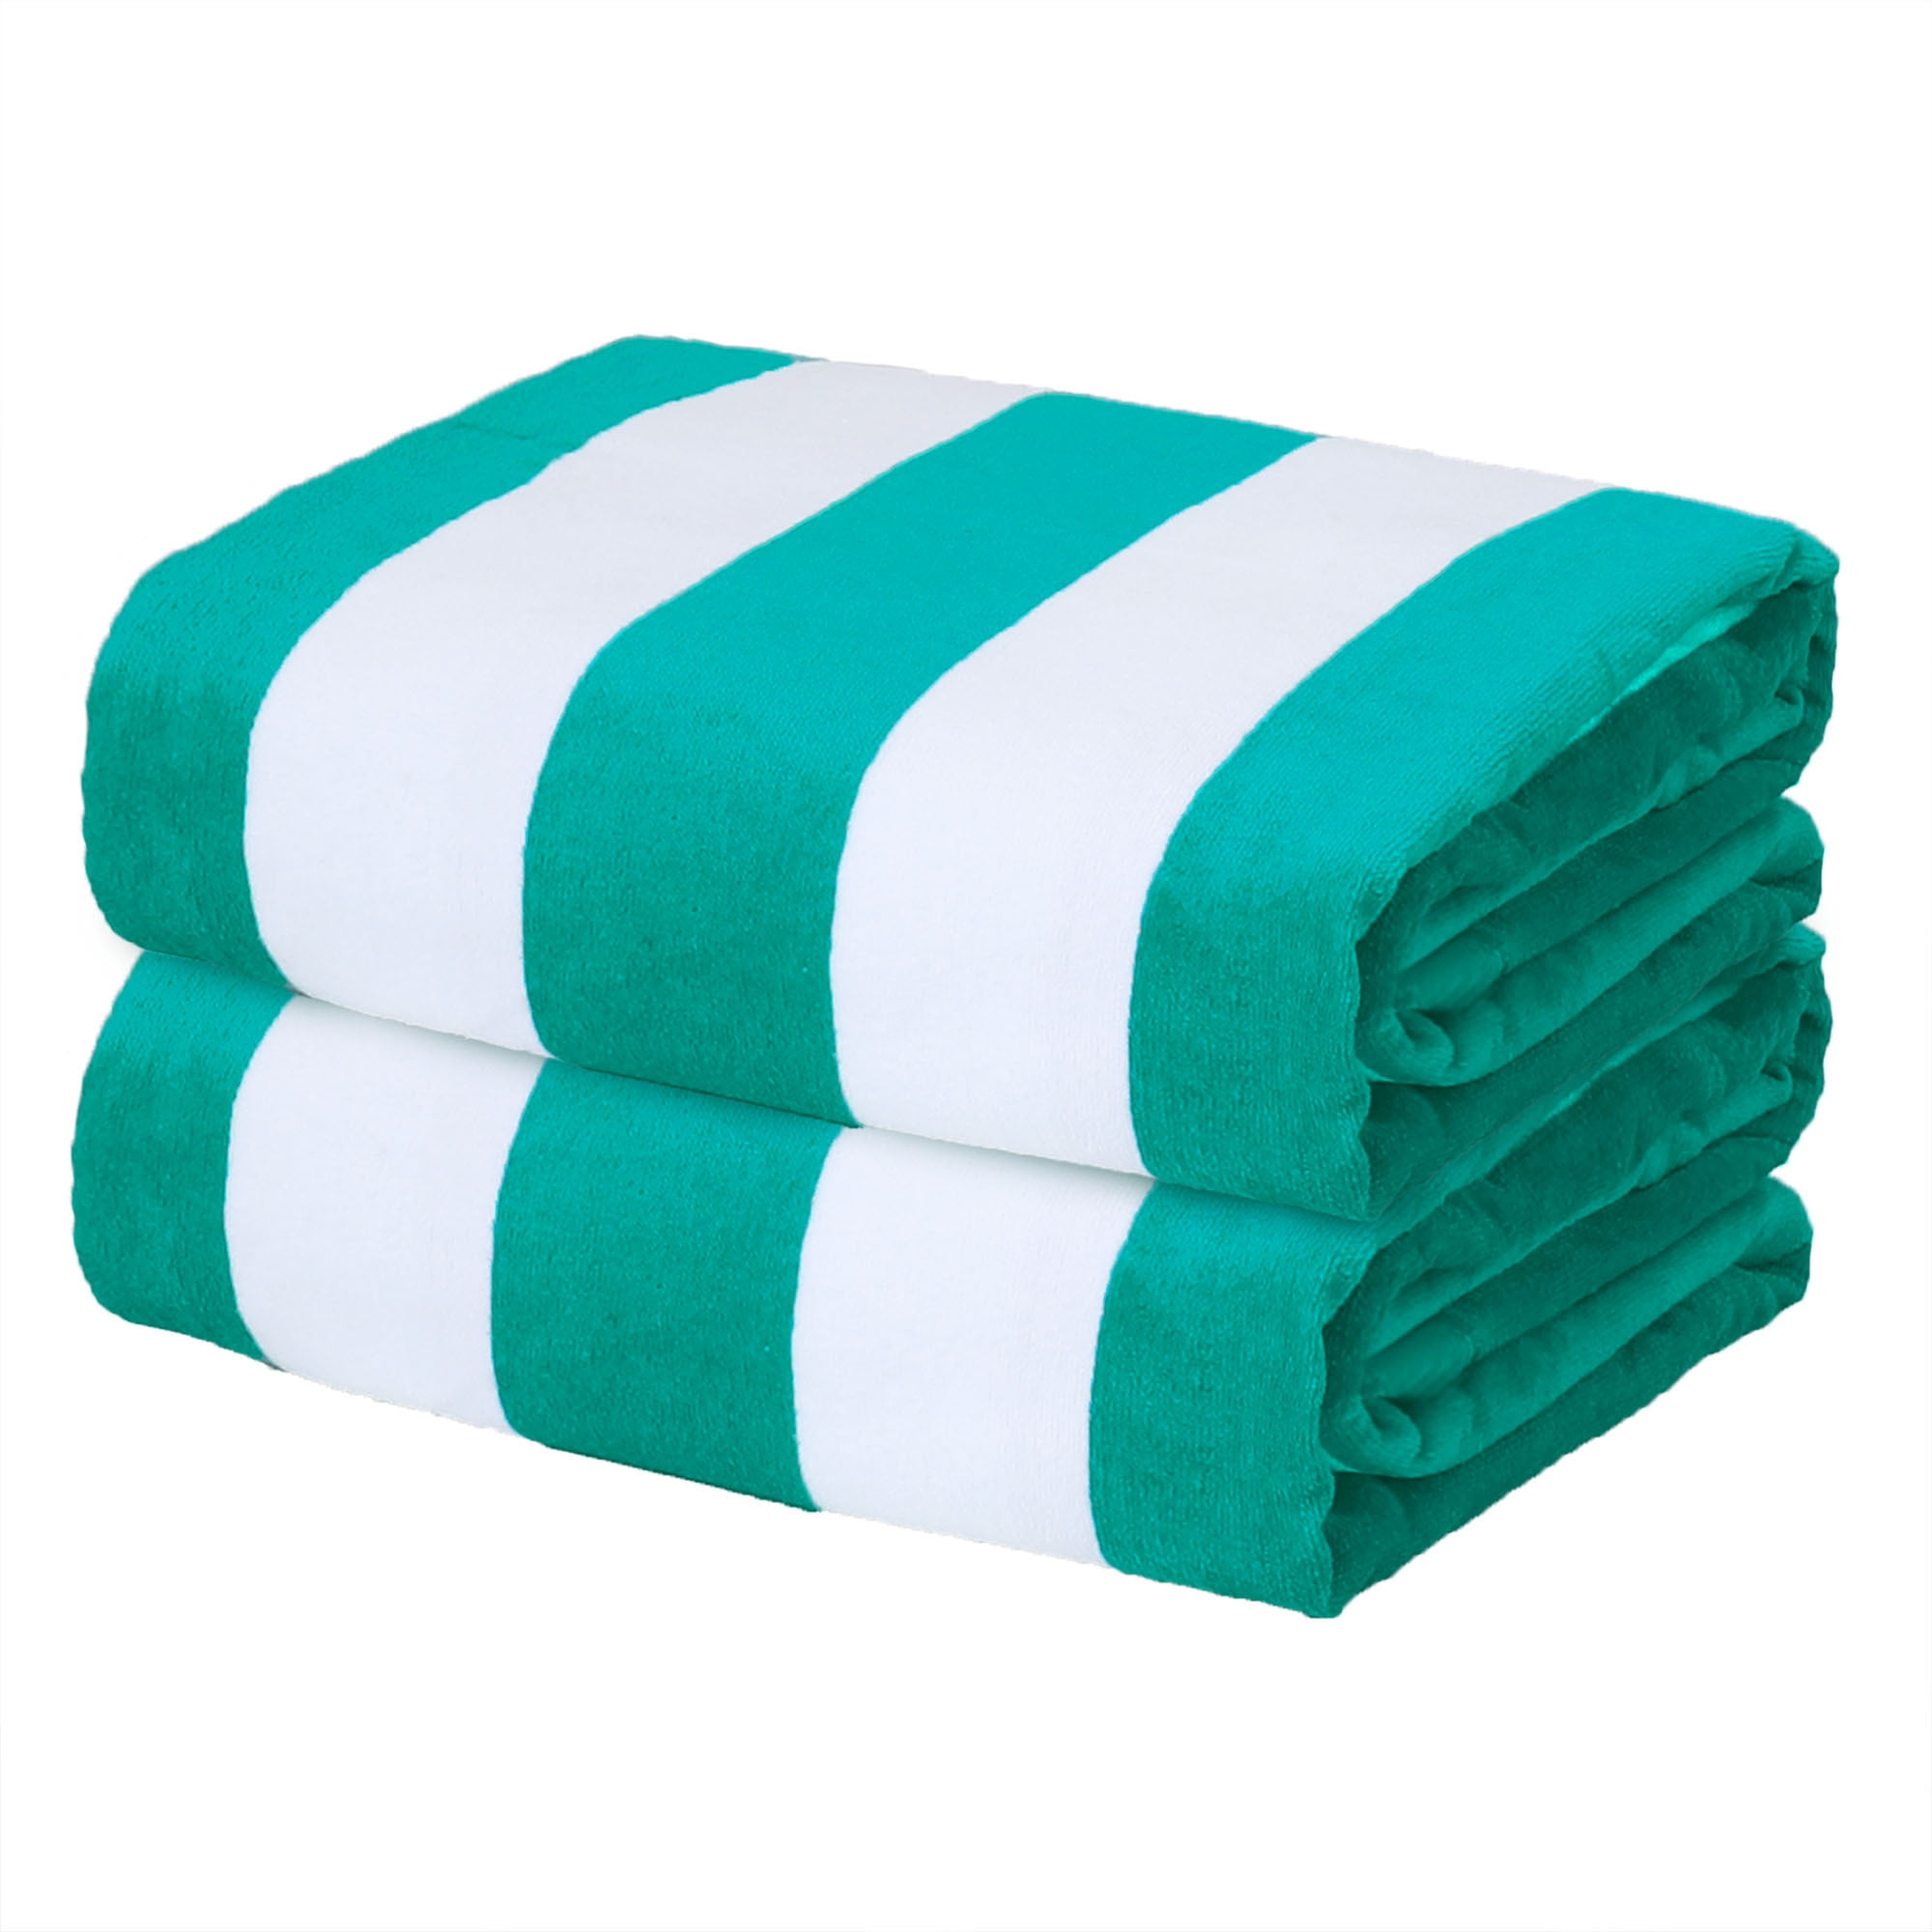 White Classic Beach Towels Oversized Green Cabana Stripe Cotton Bath Towel Large - Luxury Plush Thick Hotel Swim Pool Towels for Adults Super